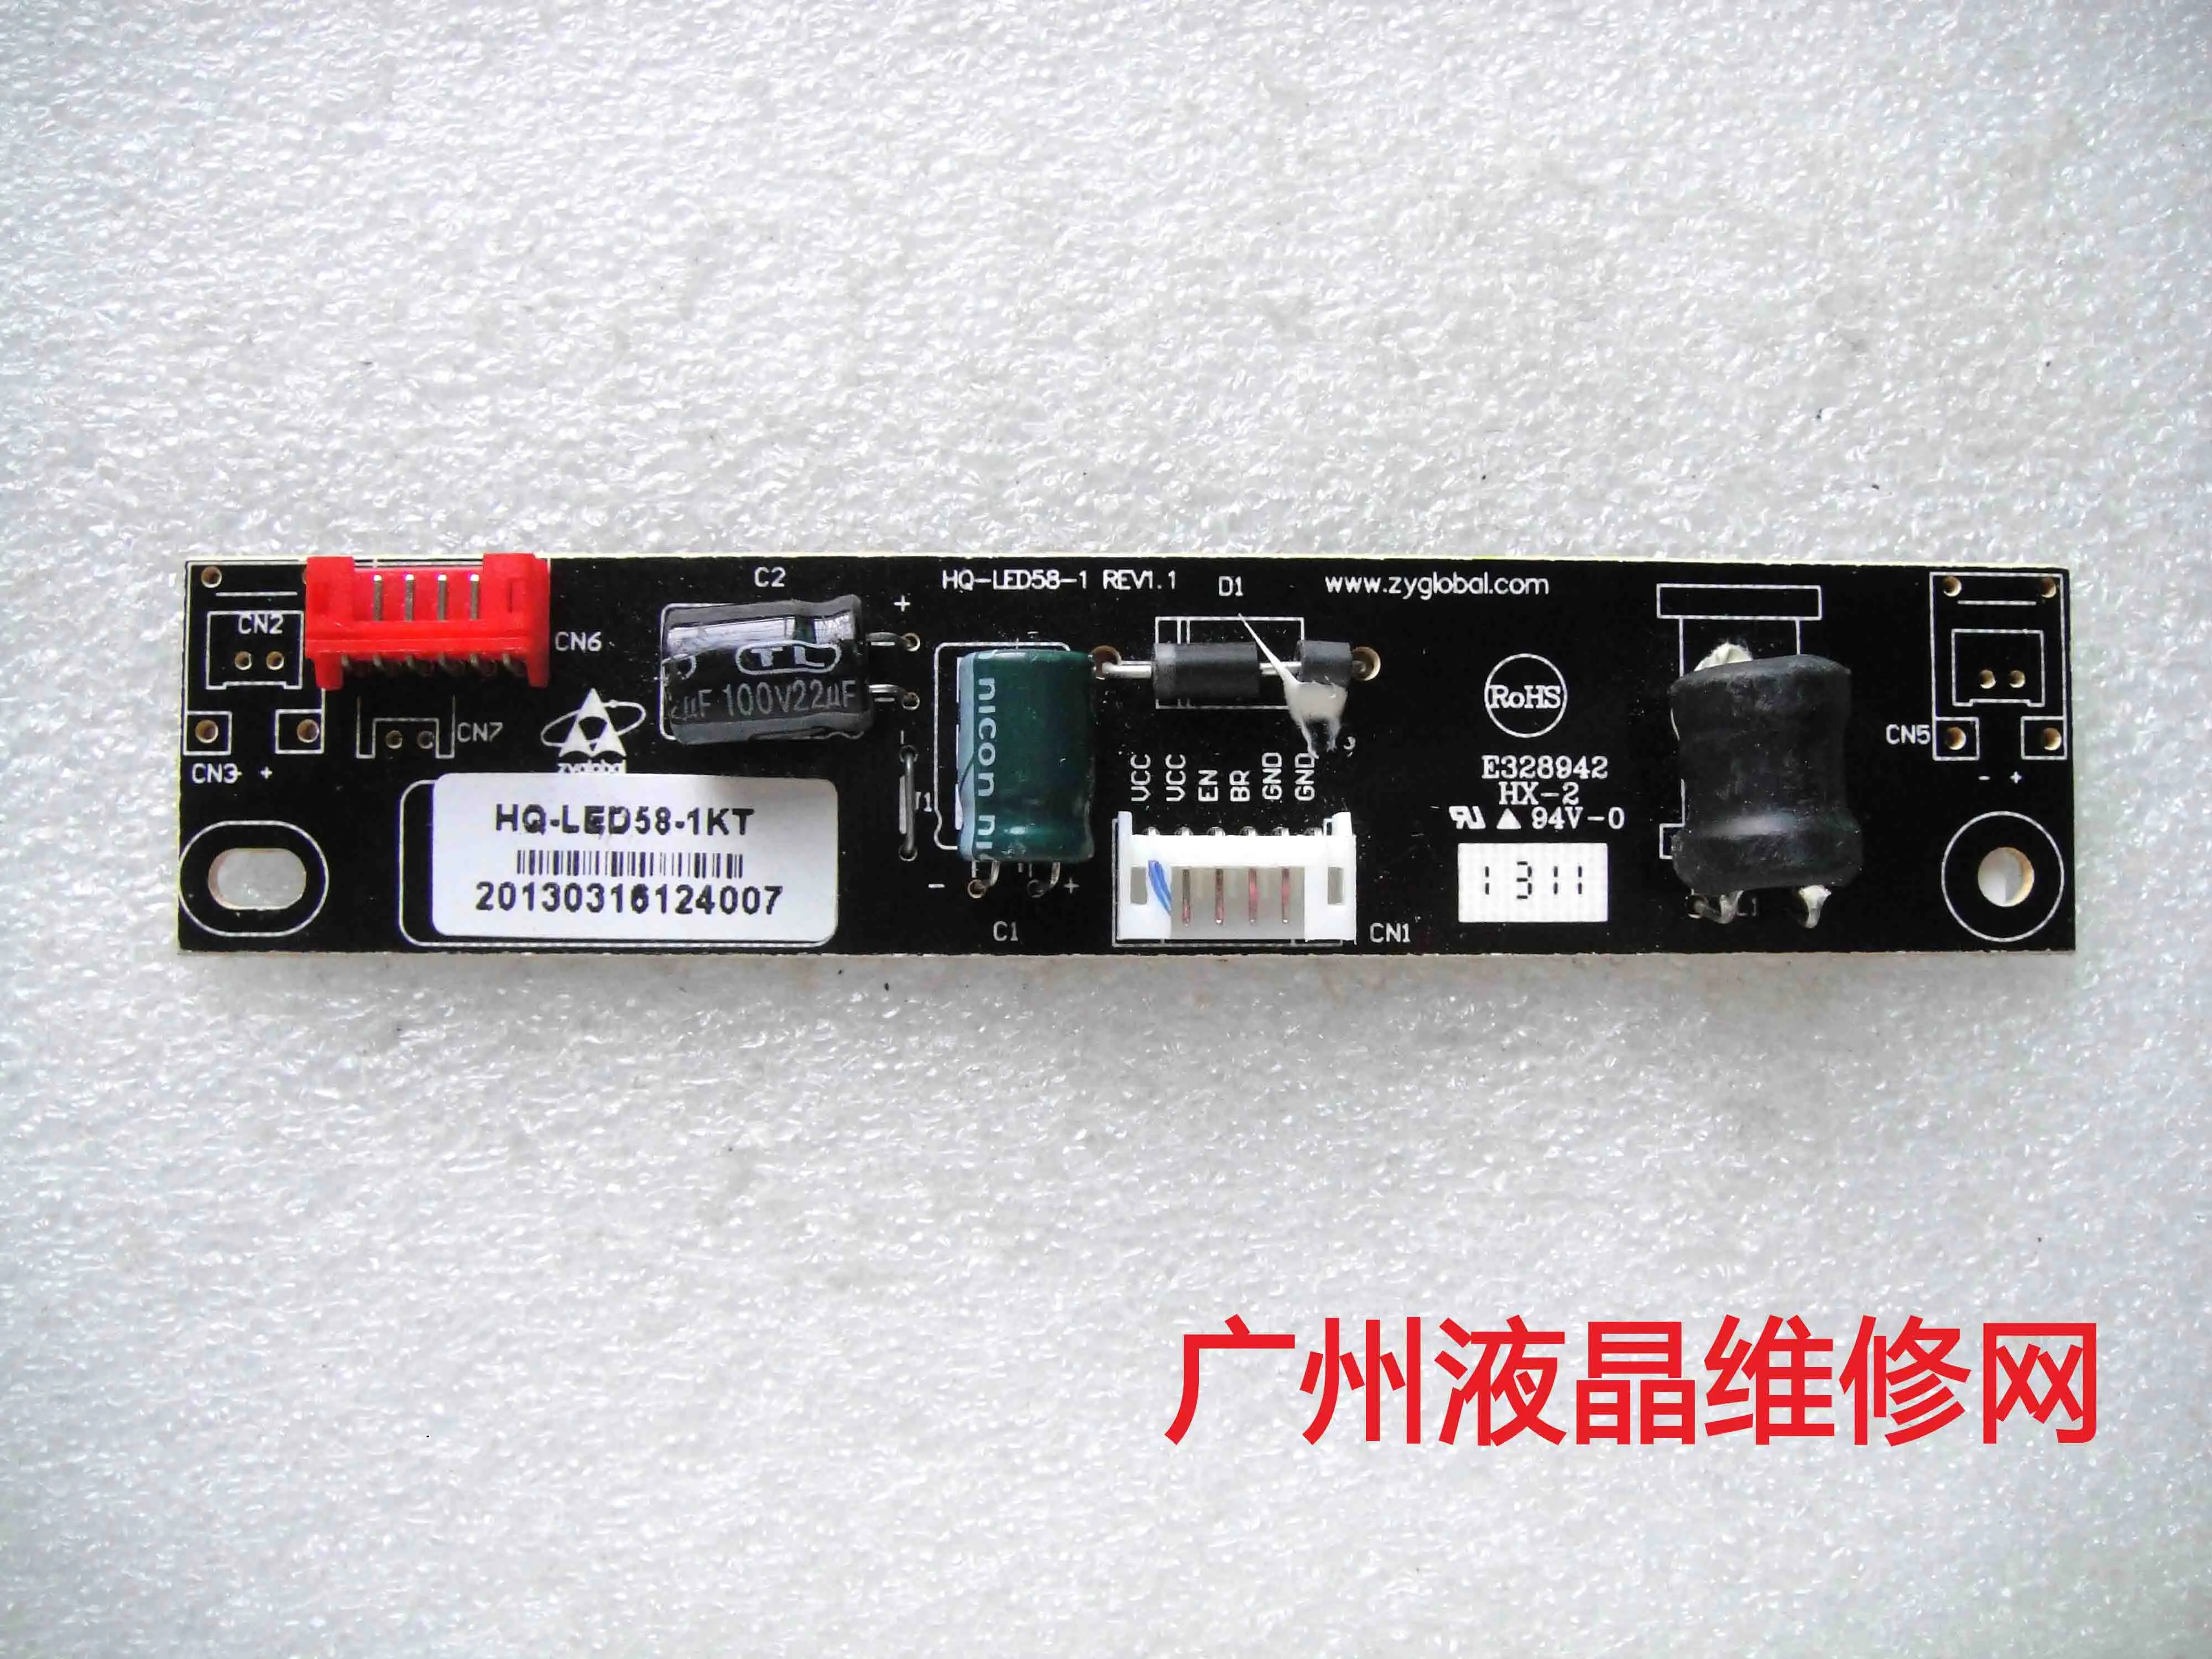 

LED LCD plate HDLED24M9 litres platen general HQ-LED58-1KT constant current board E364546